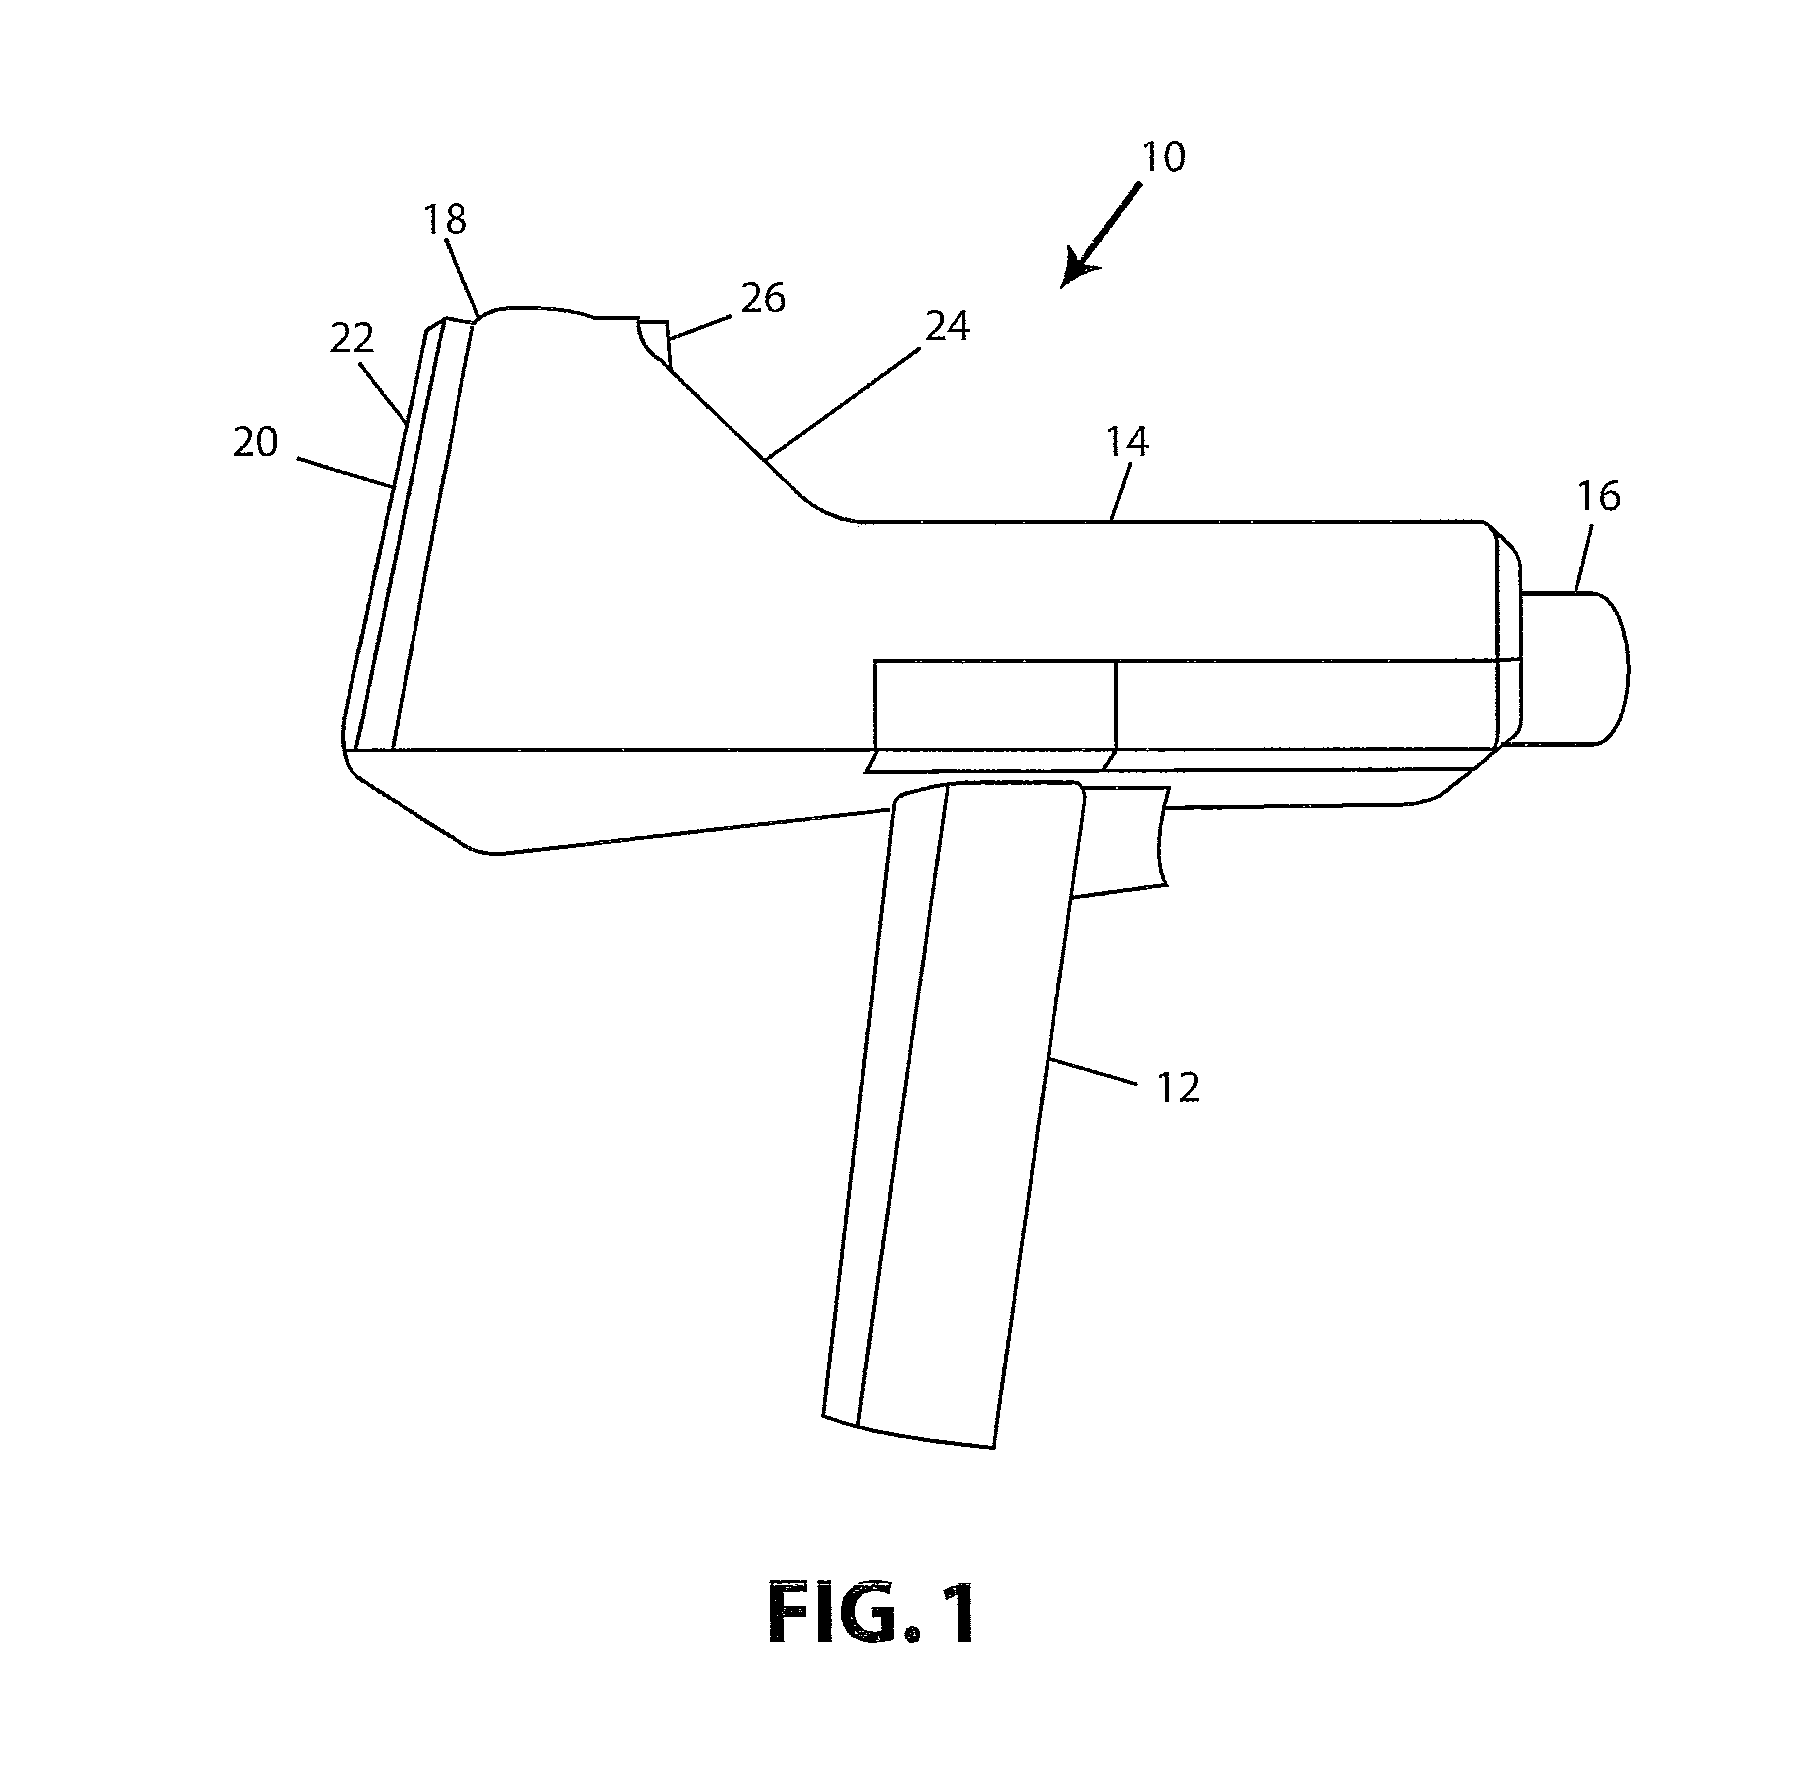 Ultrasonically controllable grease dispensing tool